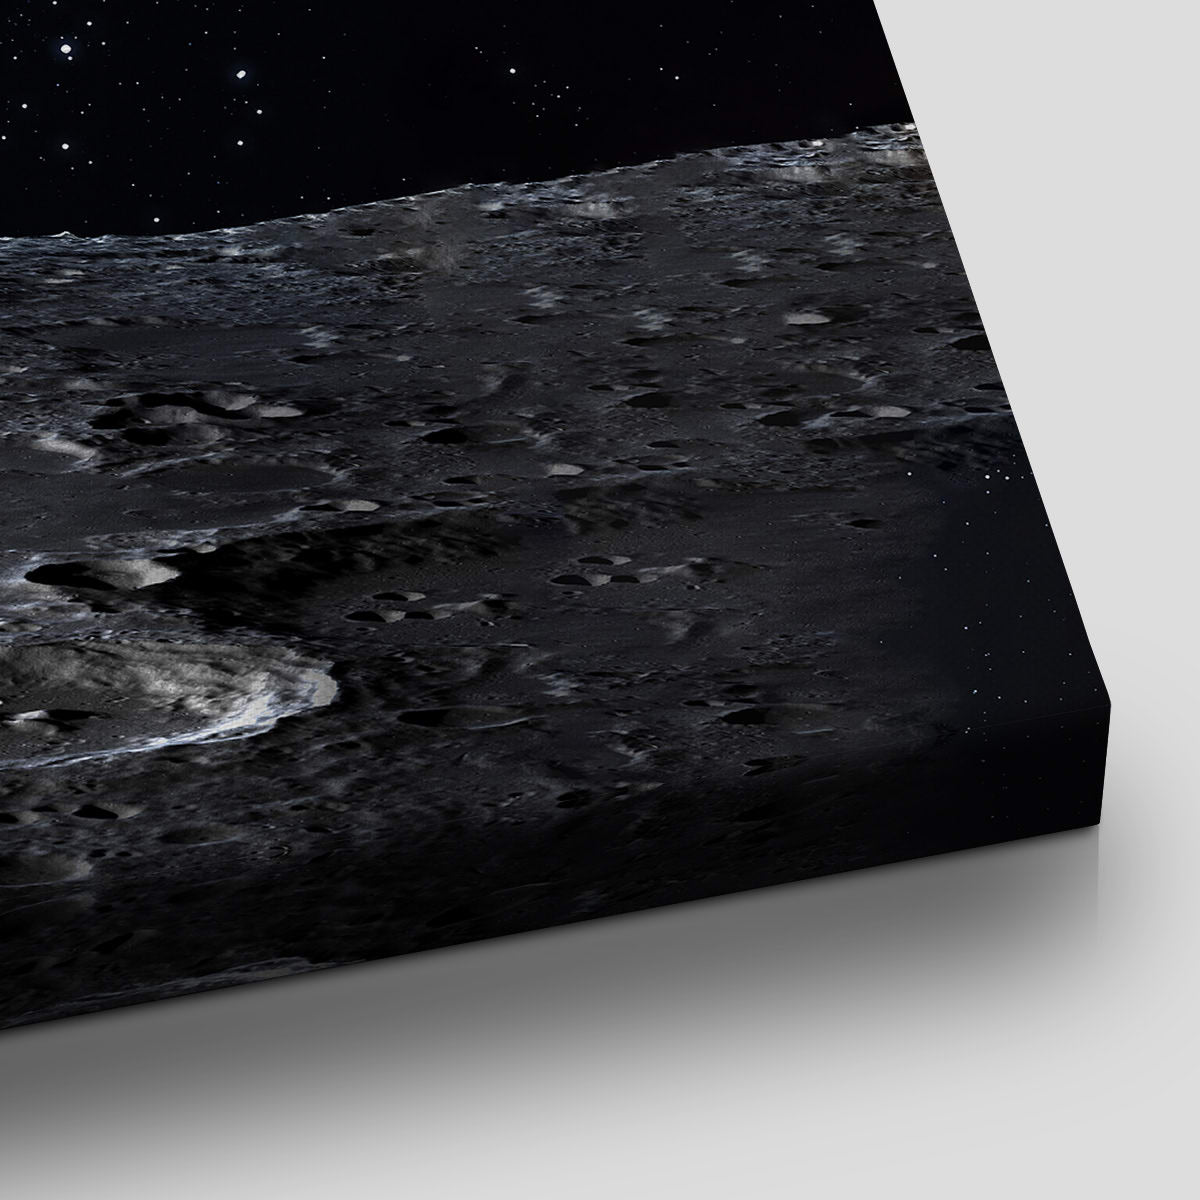 Earth Seen From The Moon Canvas Wall Art